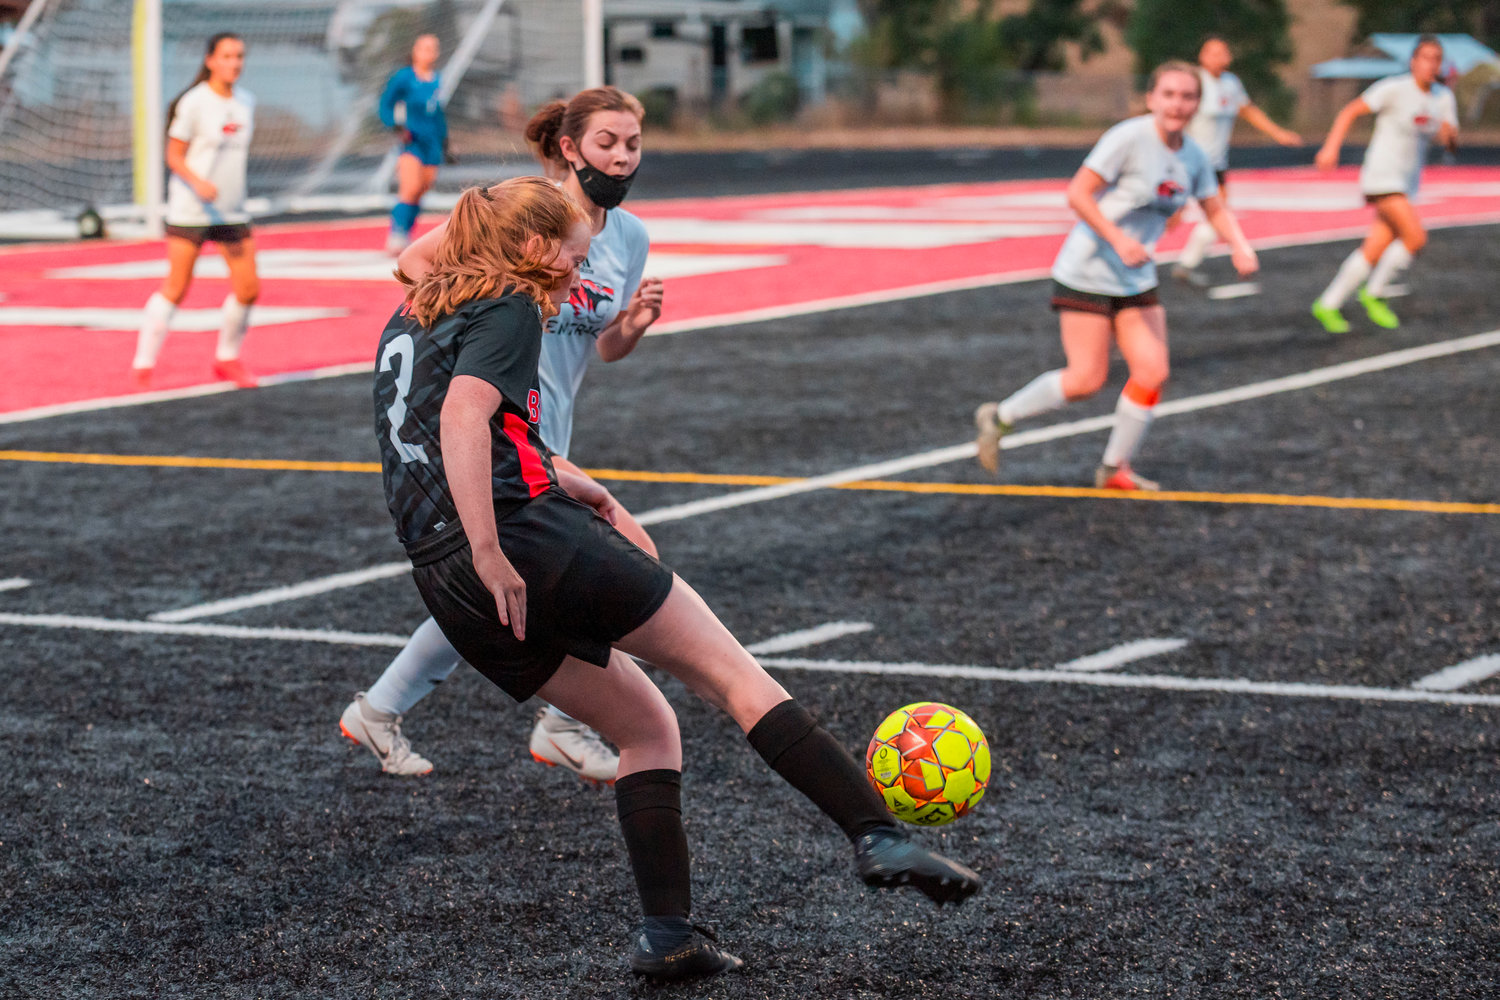 Tenino’s Abby Severse (2) kicks the ball down field Tuesday night at Beaver Stadium during a game against Centralia.